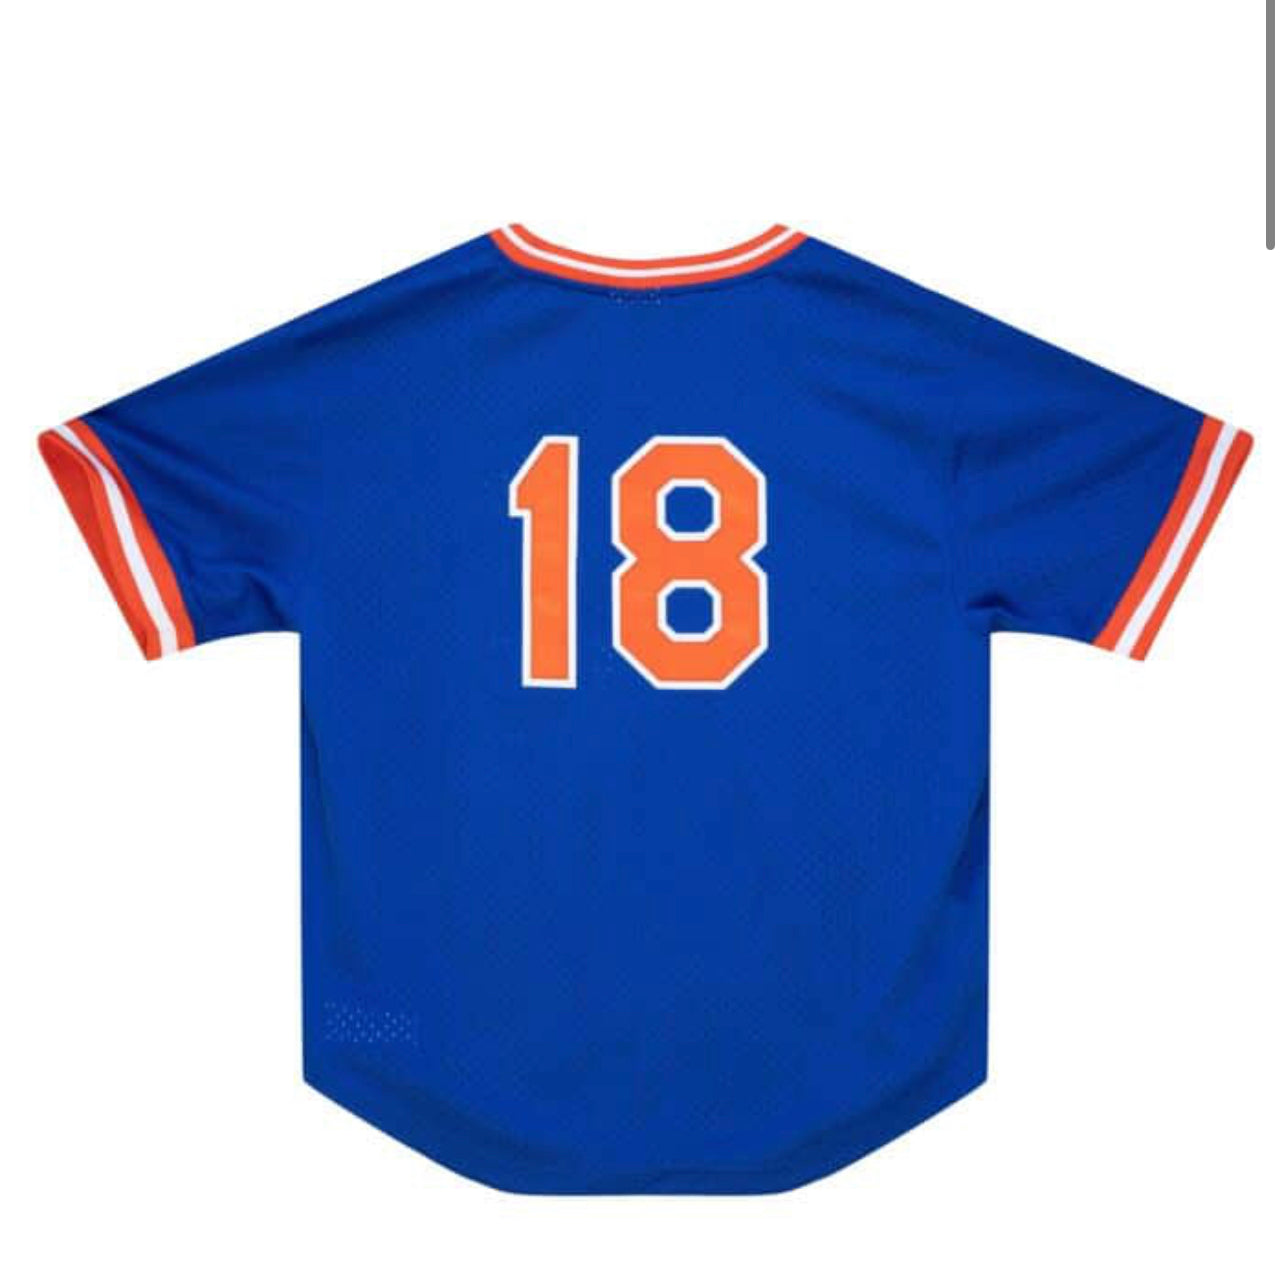 Size S New York Mets MLB Jerseys for sale